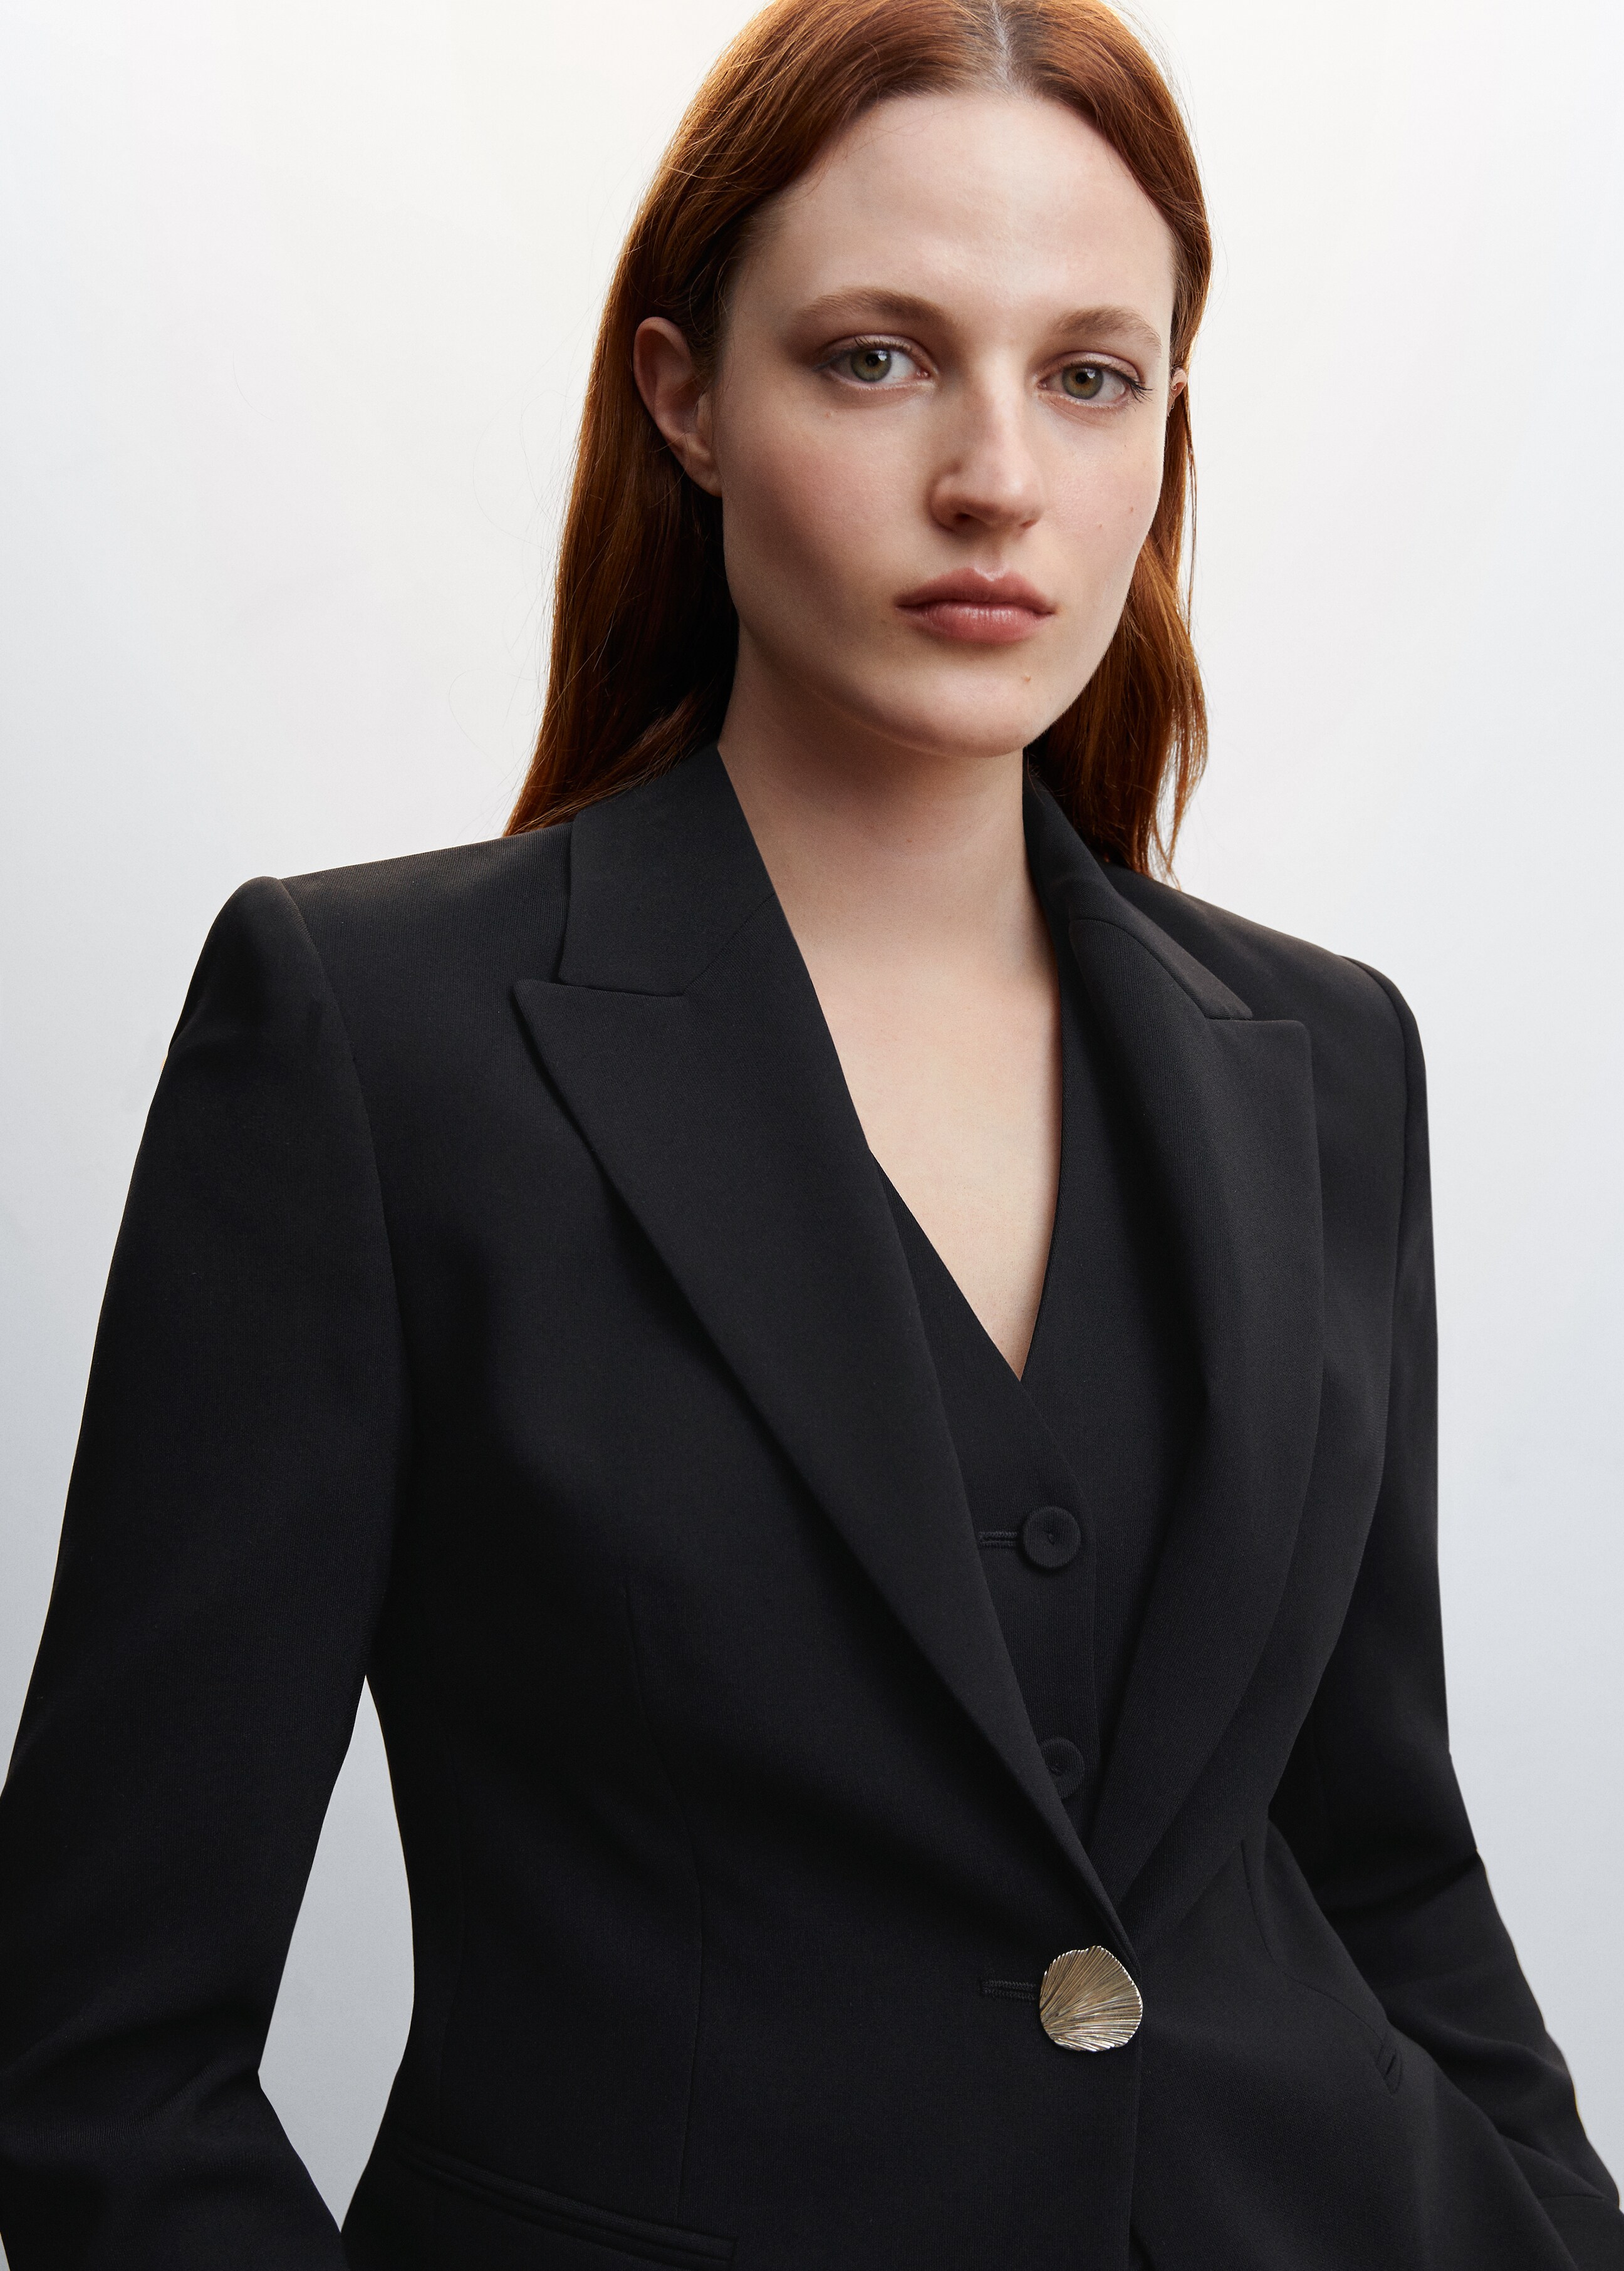 Suit jacket with buttons  - Details of the article 6